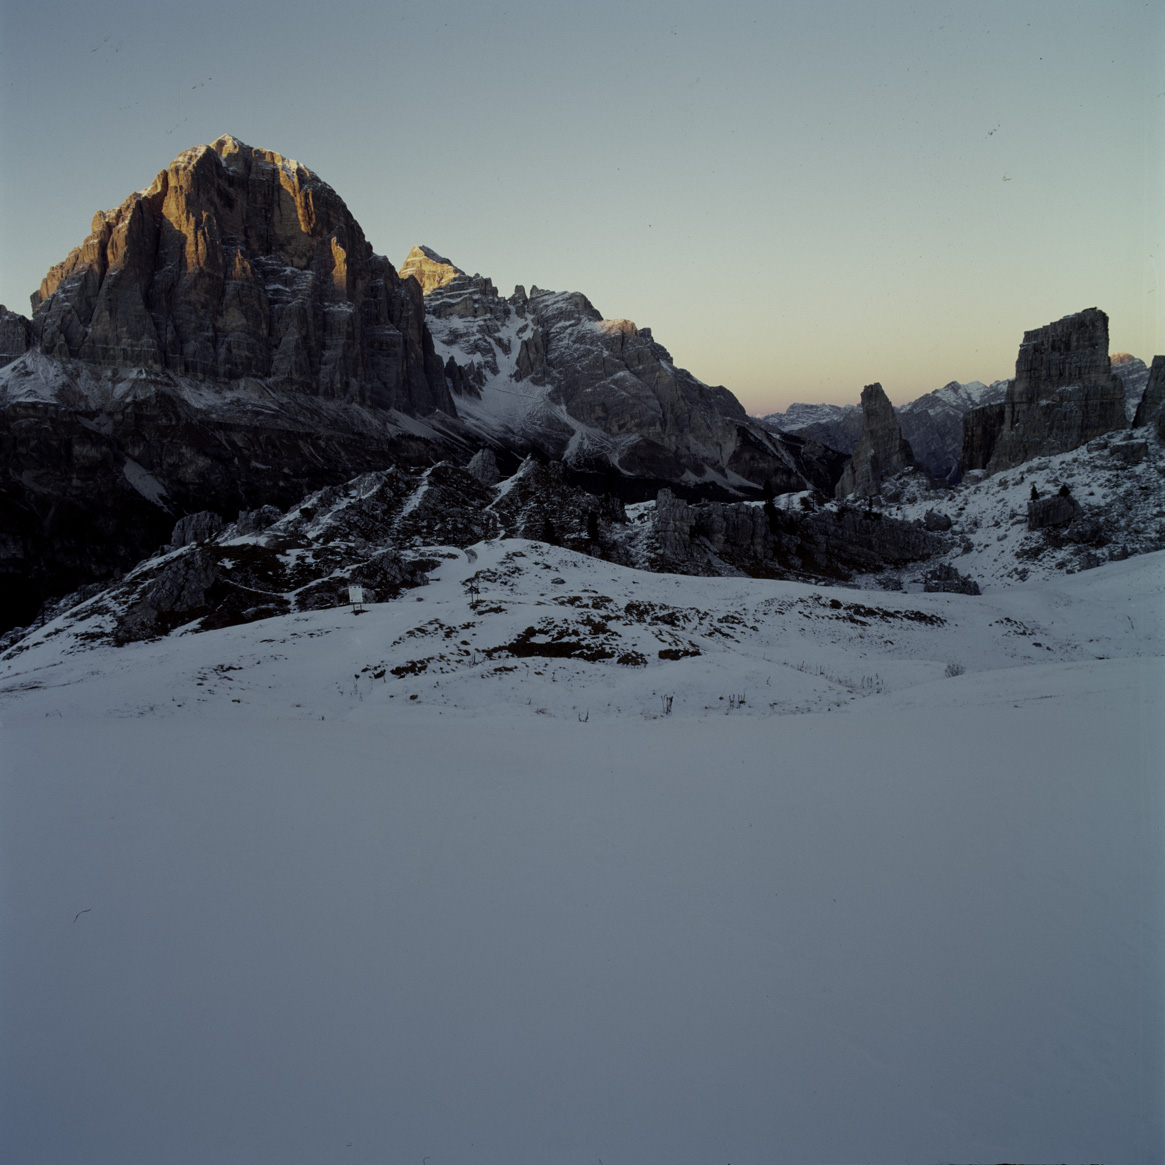 Peter Hebeisen, The Battle of Piz Lagazuoi, Dolomites II, Italy, 2000
Pigment print on Archival paper
162 x 162 cm / Edition of  3 + 1 AP
112 x 112 cm / Edition of  5 + 1 AP
